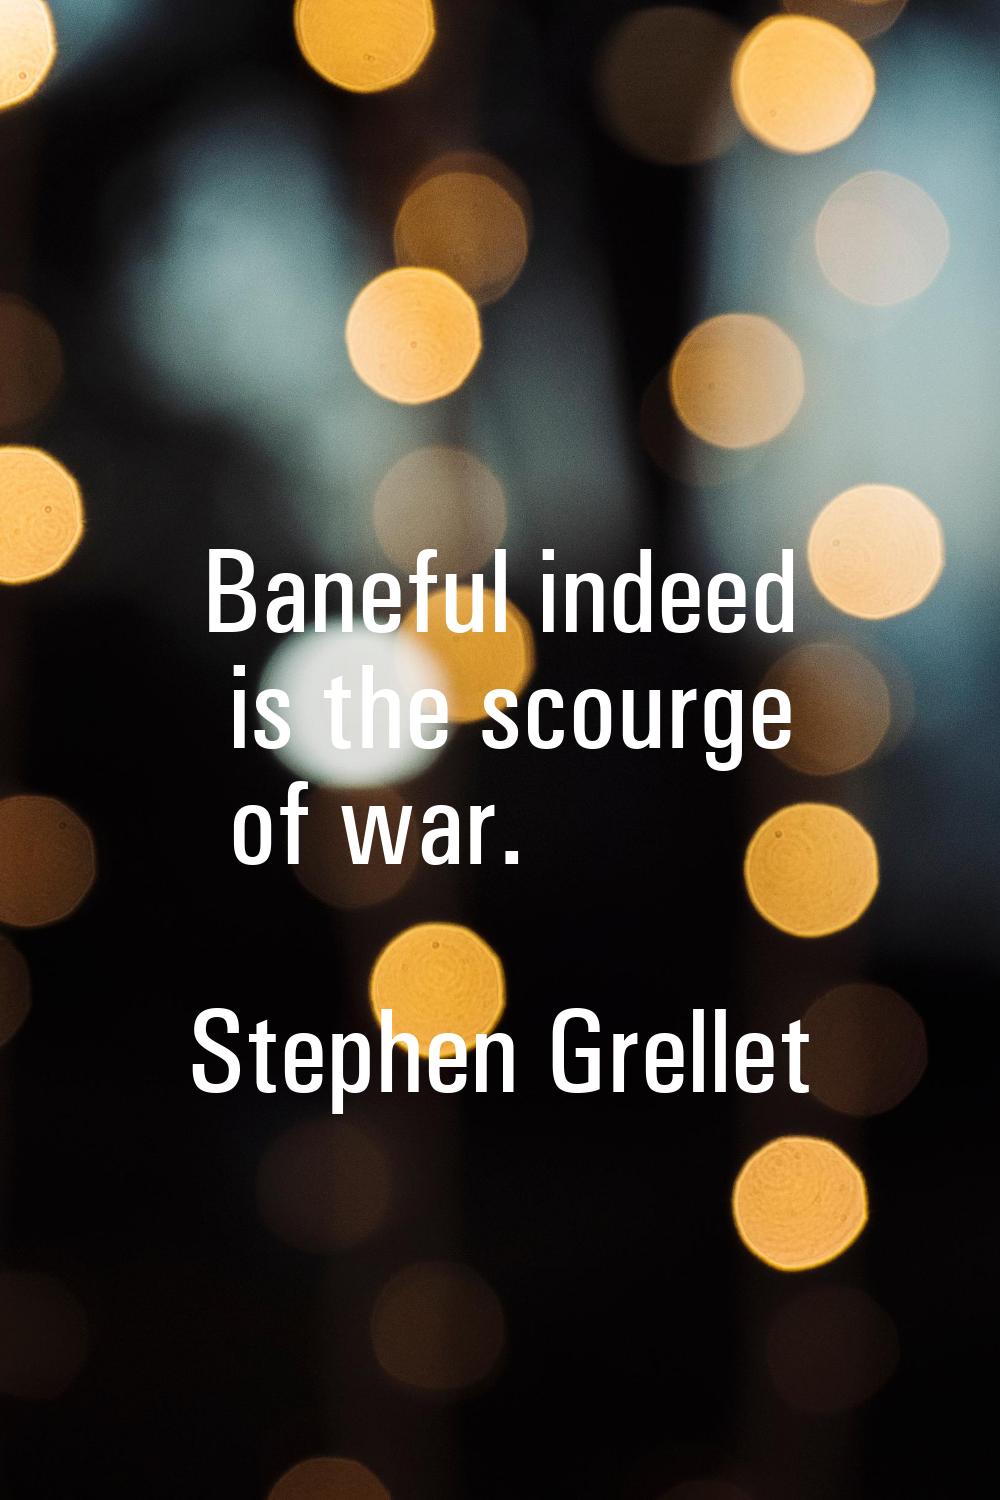 Baneful indeed is the scourge of war.